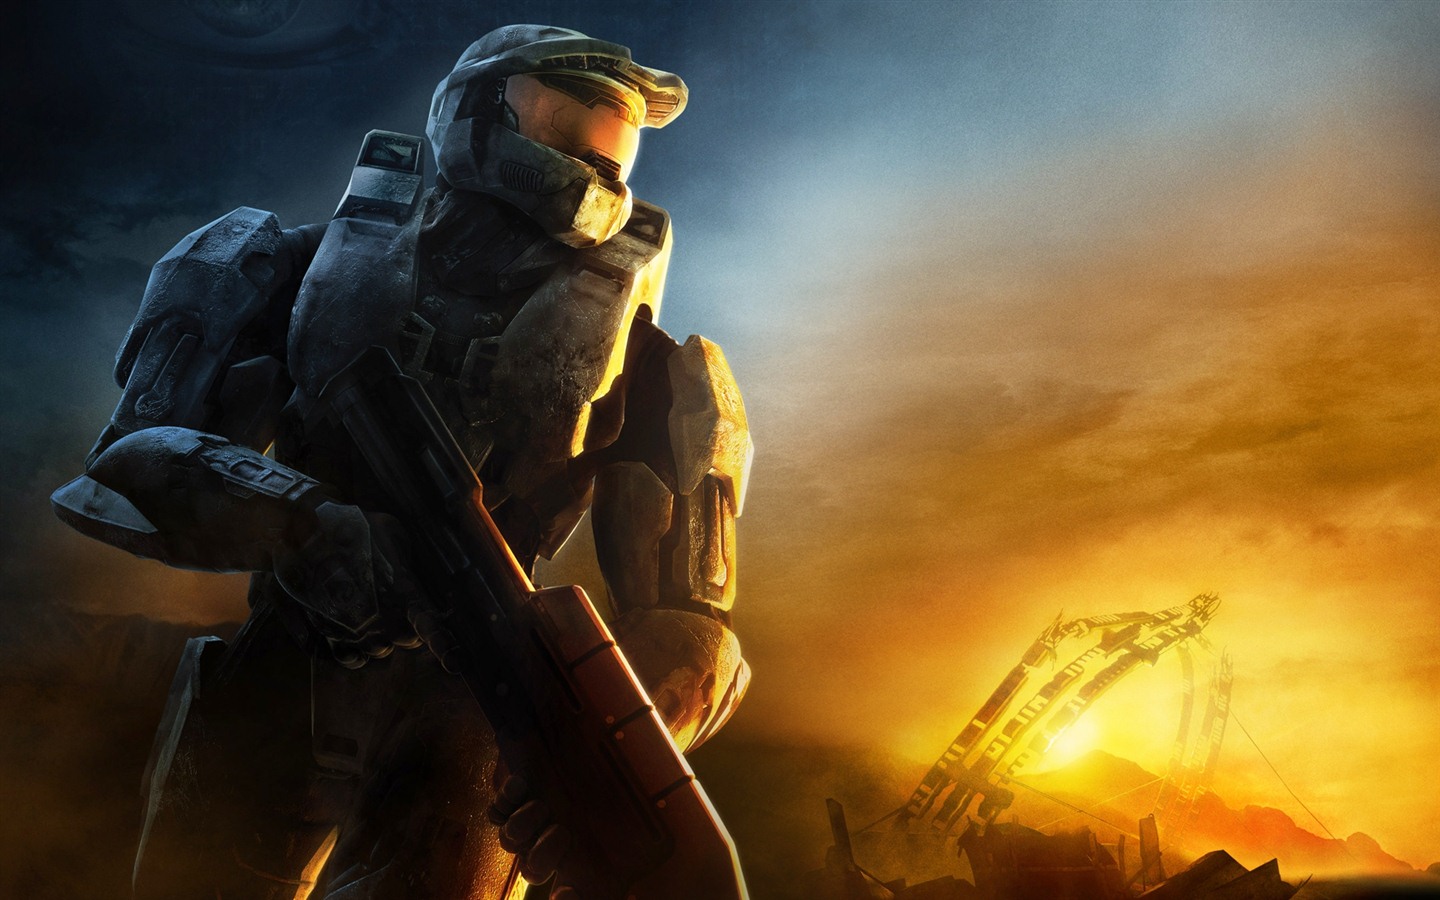 Halo game HD wallpapers #22 - 1440x900